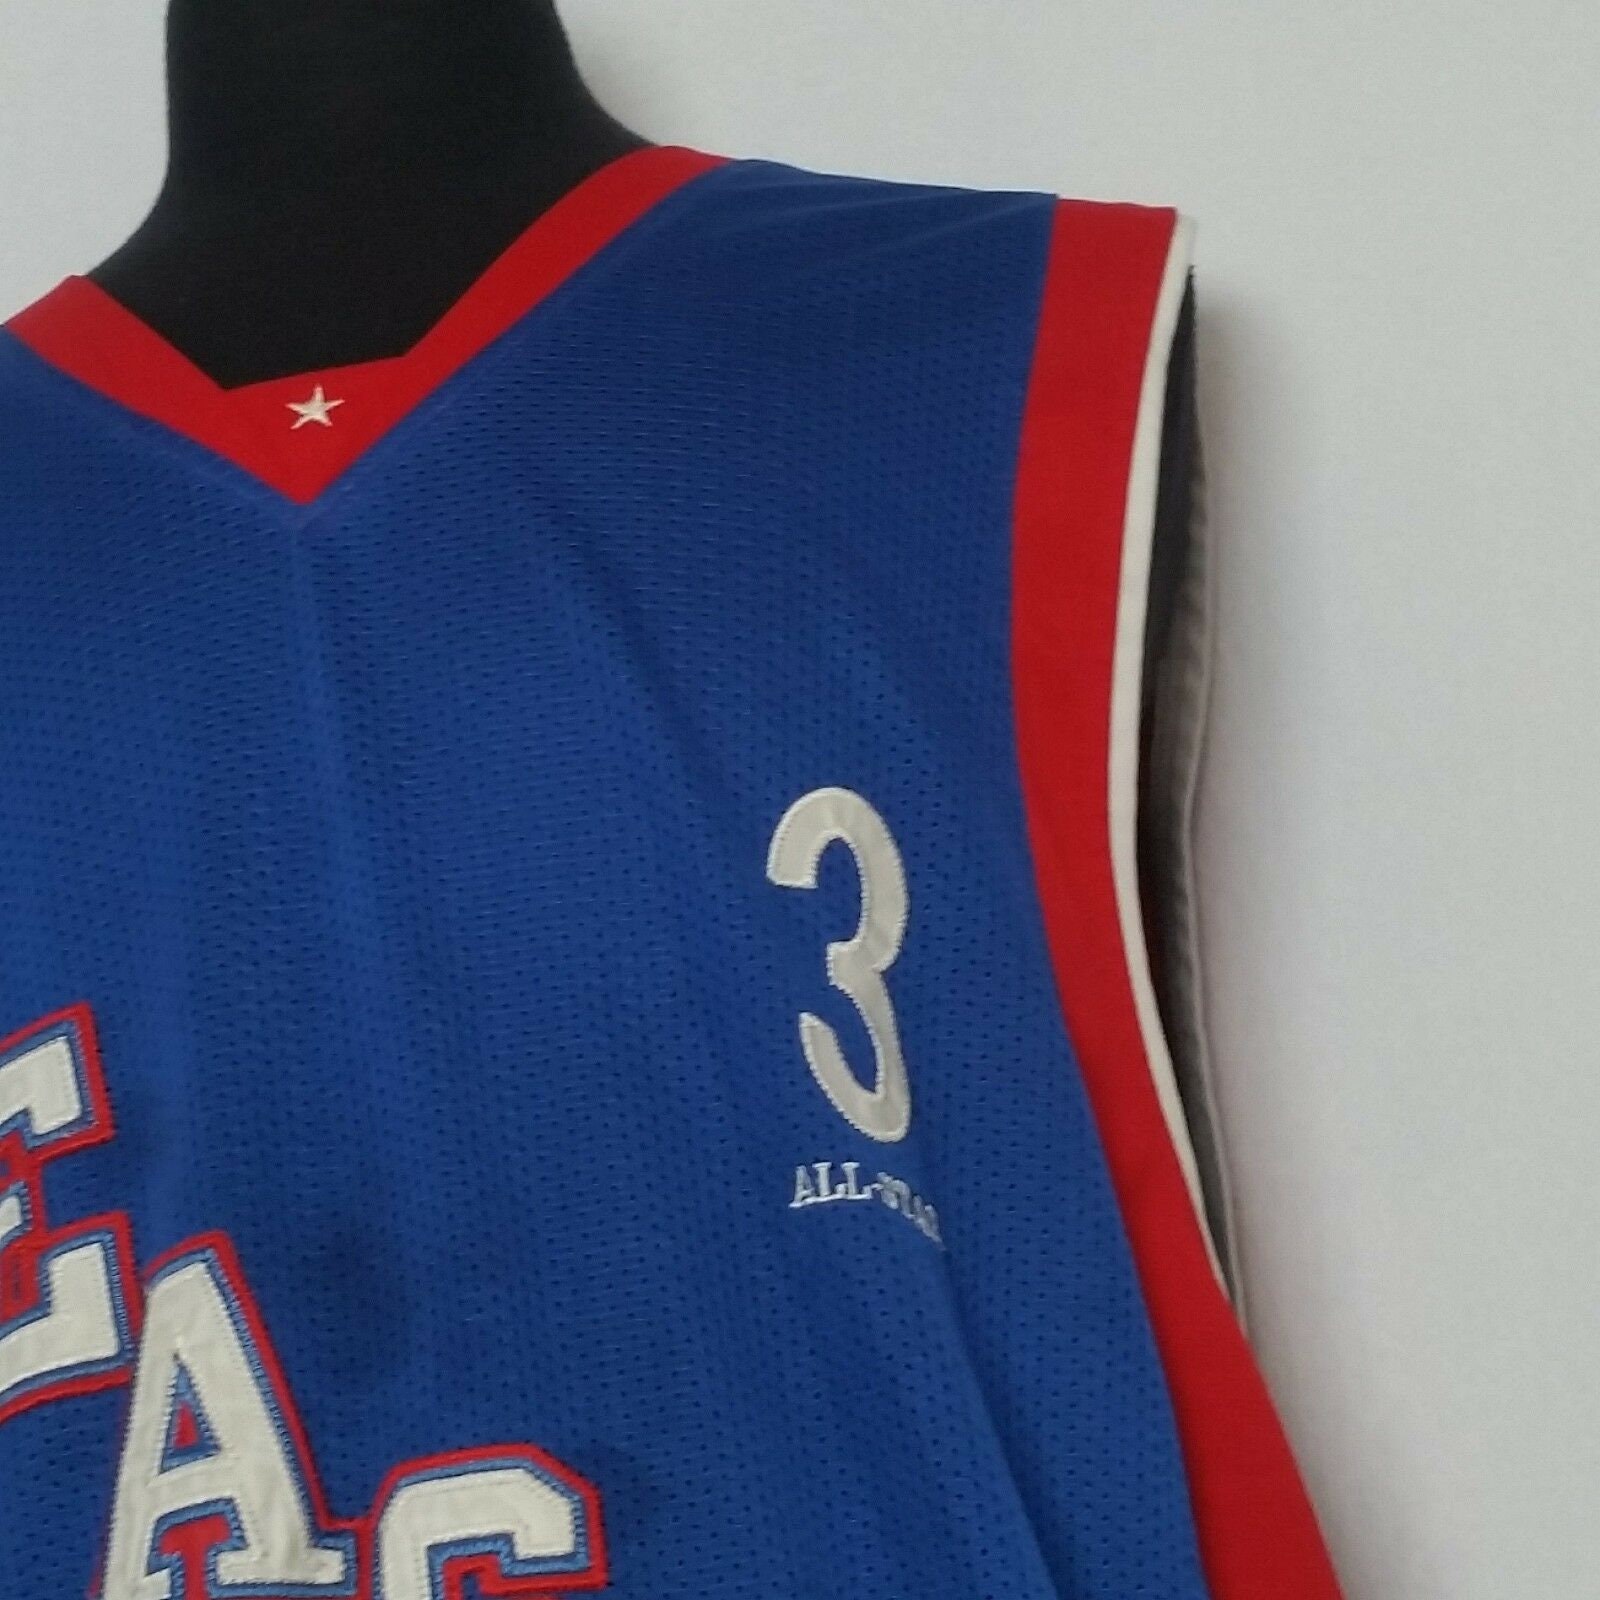 JensFunTreasures Reebok East Size 56 All Star Game Jersey Iverson Mens Blue Red Staining Vintage